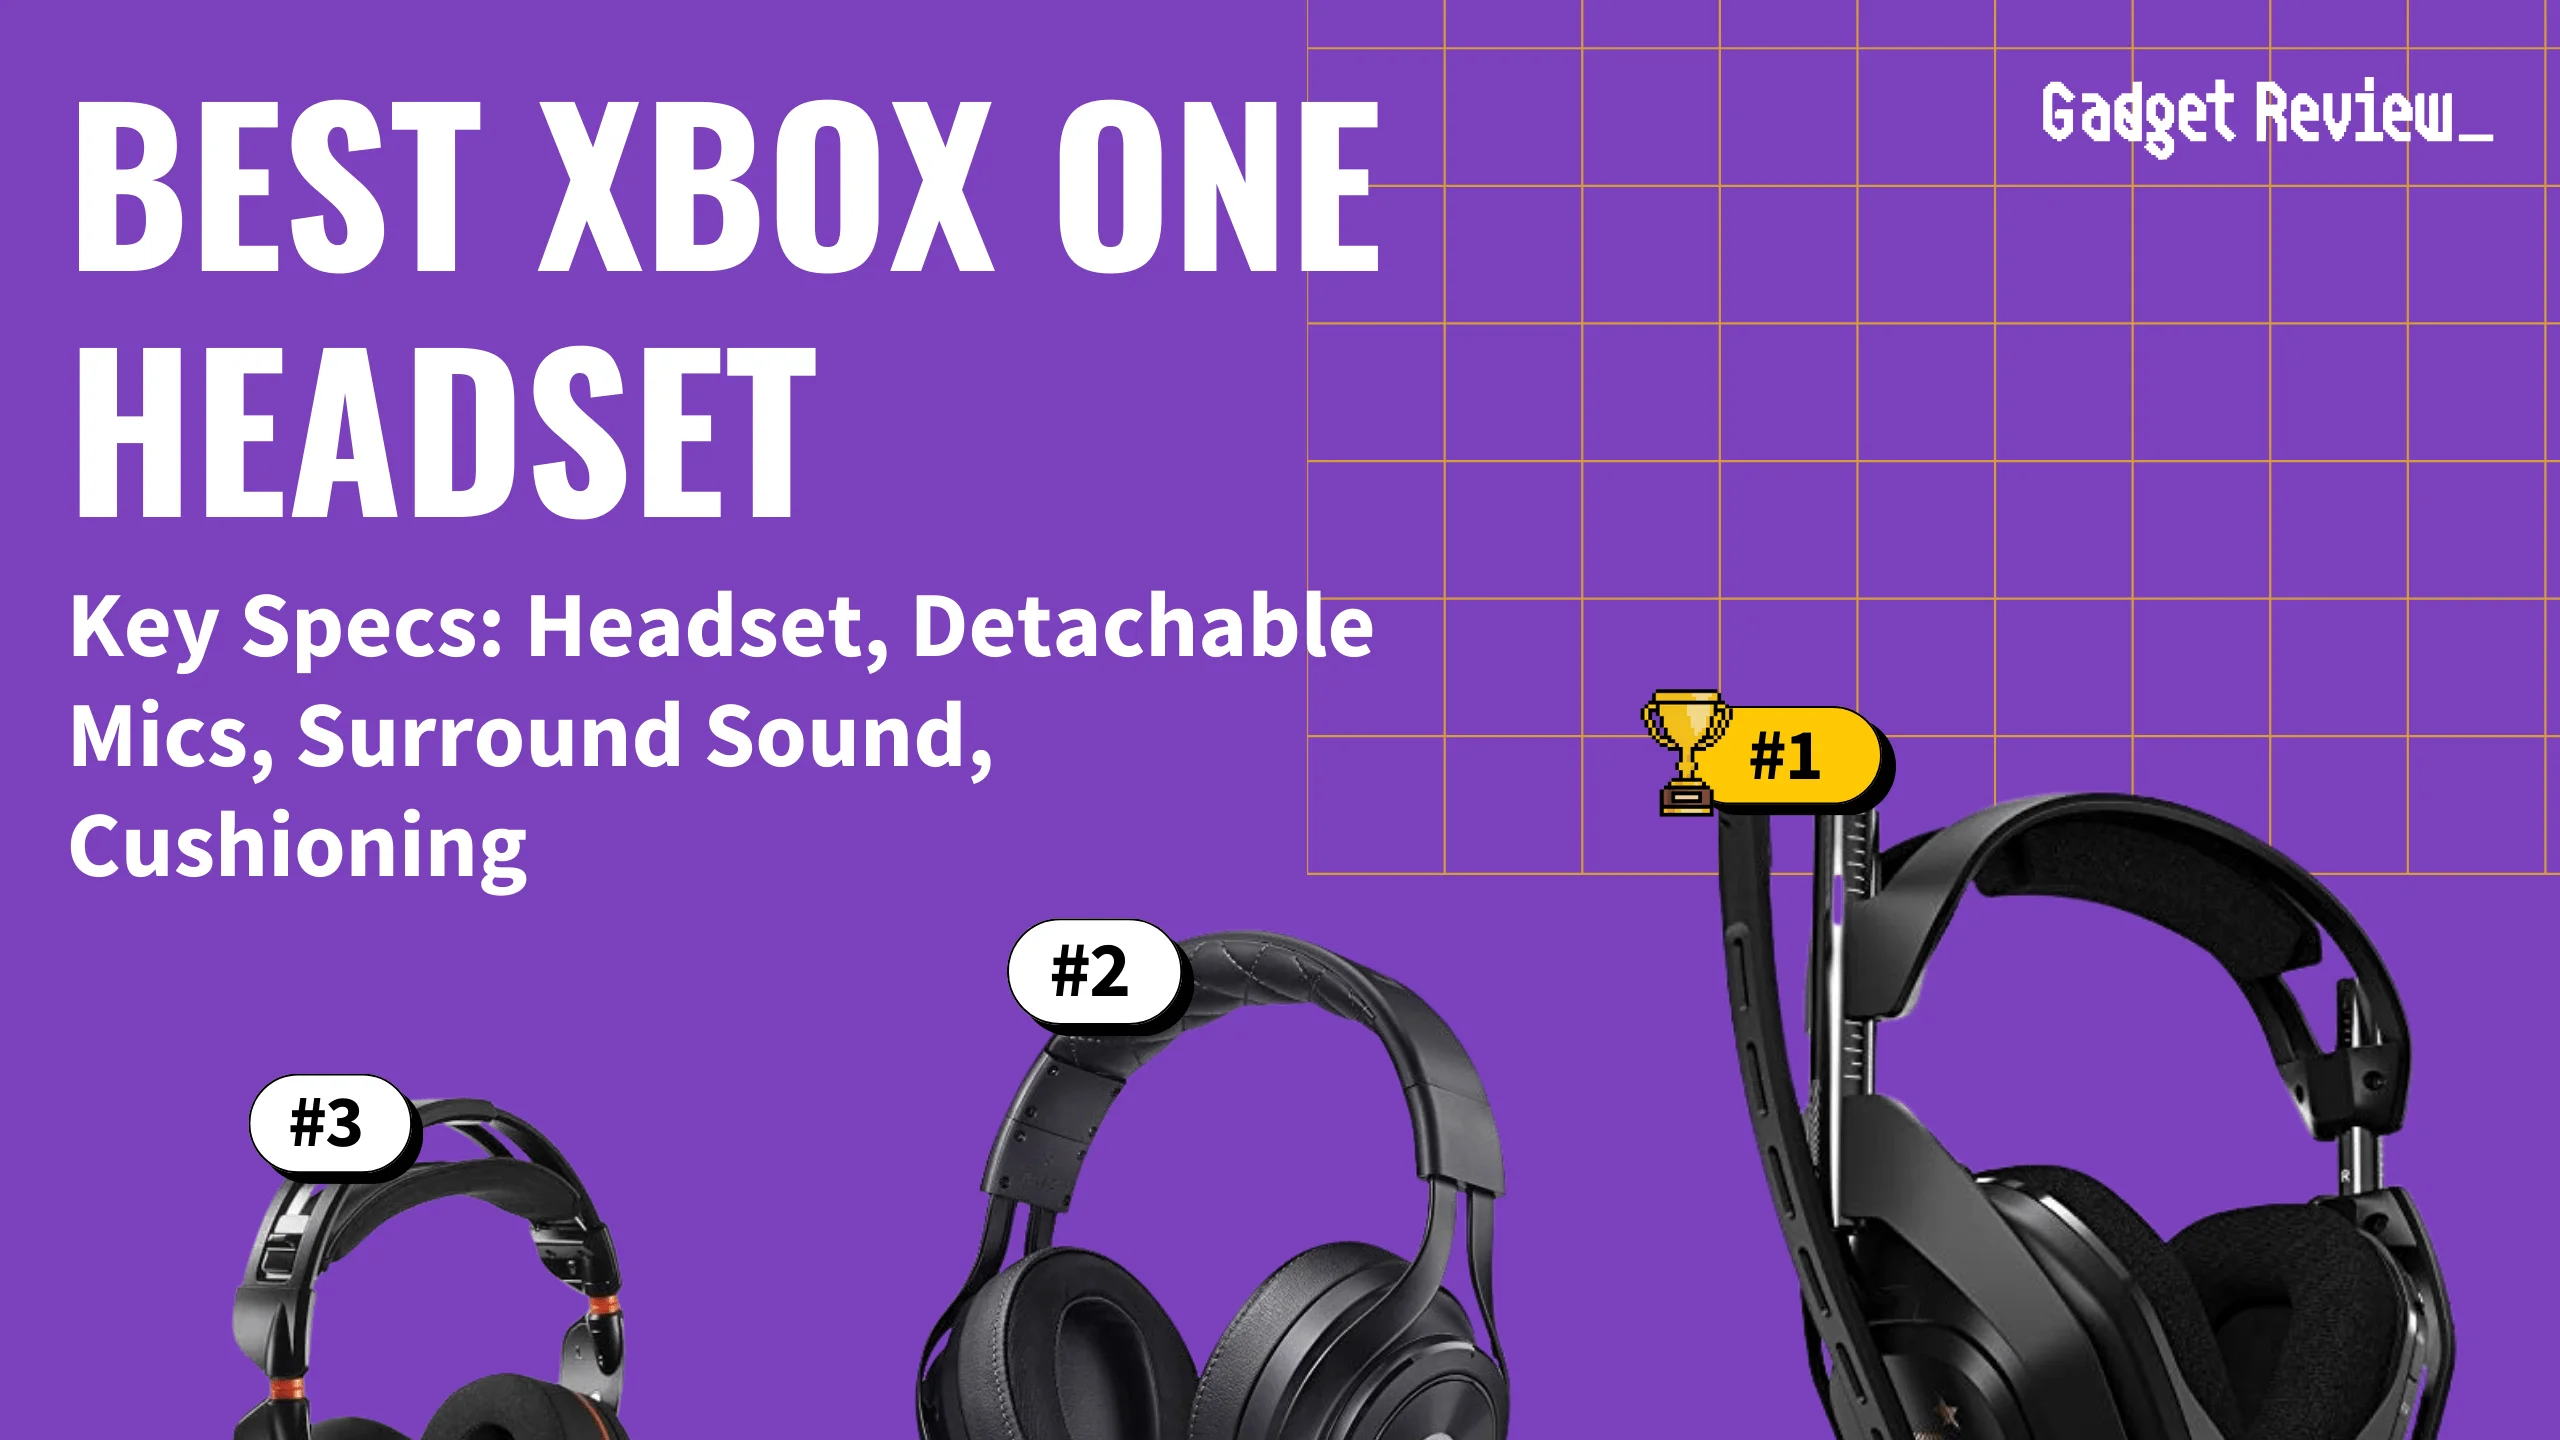 best xbox one headset featured image that shows the top three best gaming headset models